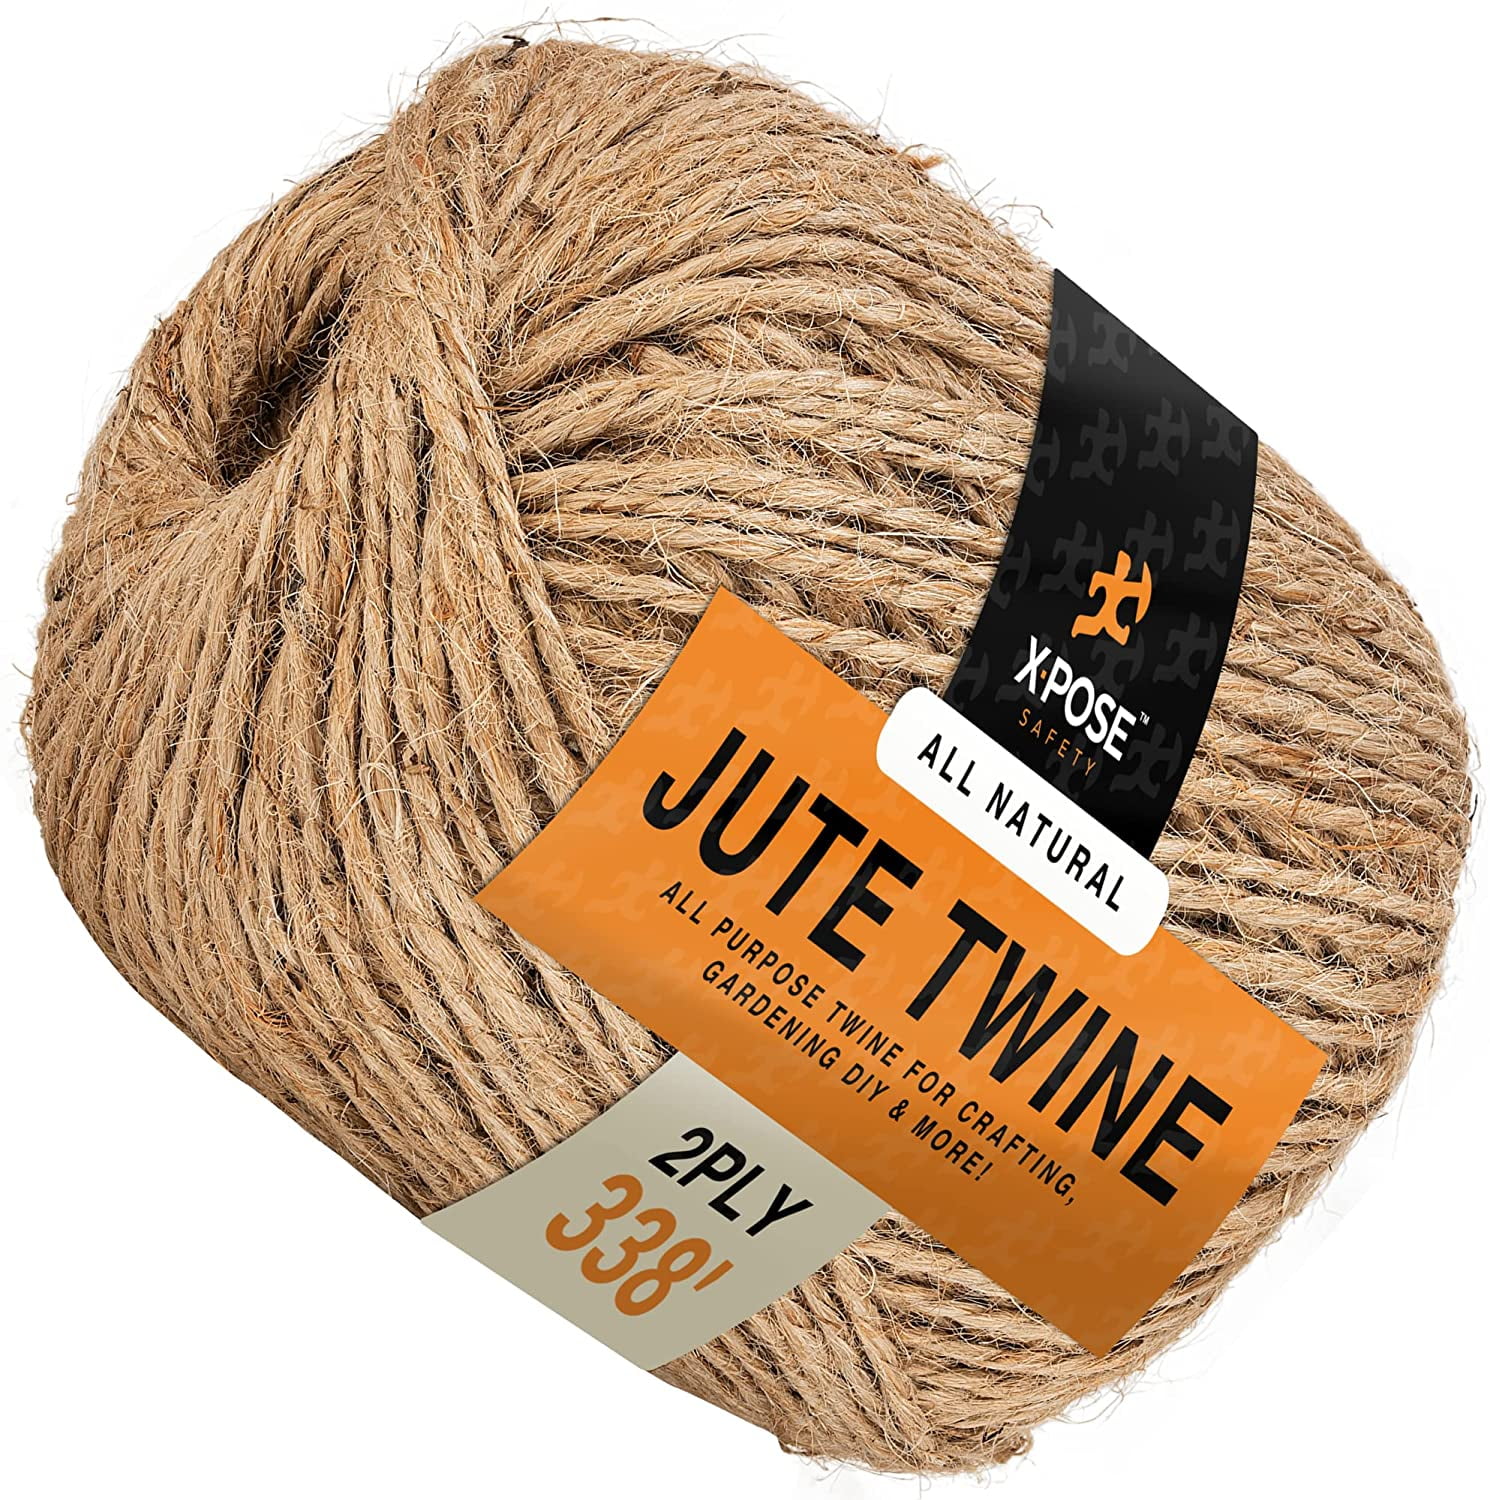 Natural Jute Twine Durable Industrial Packing Materials Heavy Duty Natural Brown Twine Jute Rope/String 3280ft/1000m for Arts, Crafts & Gardening